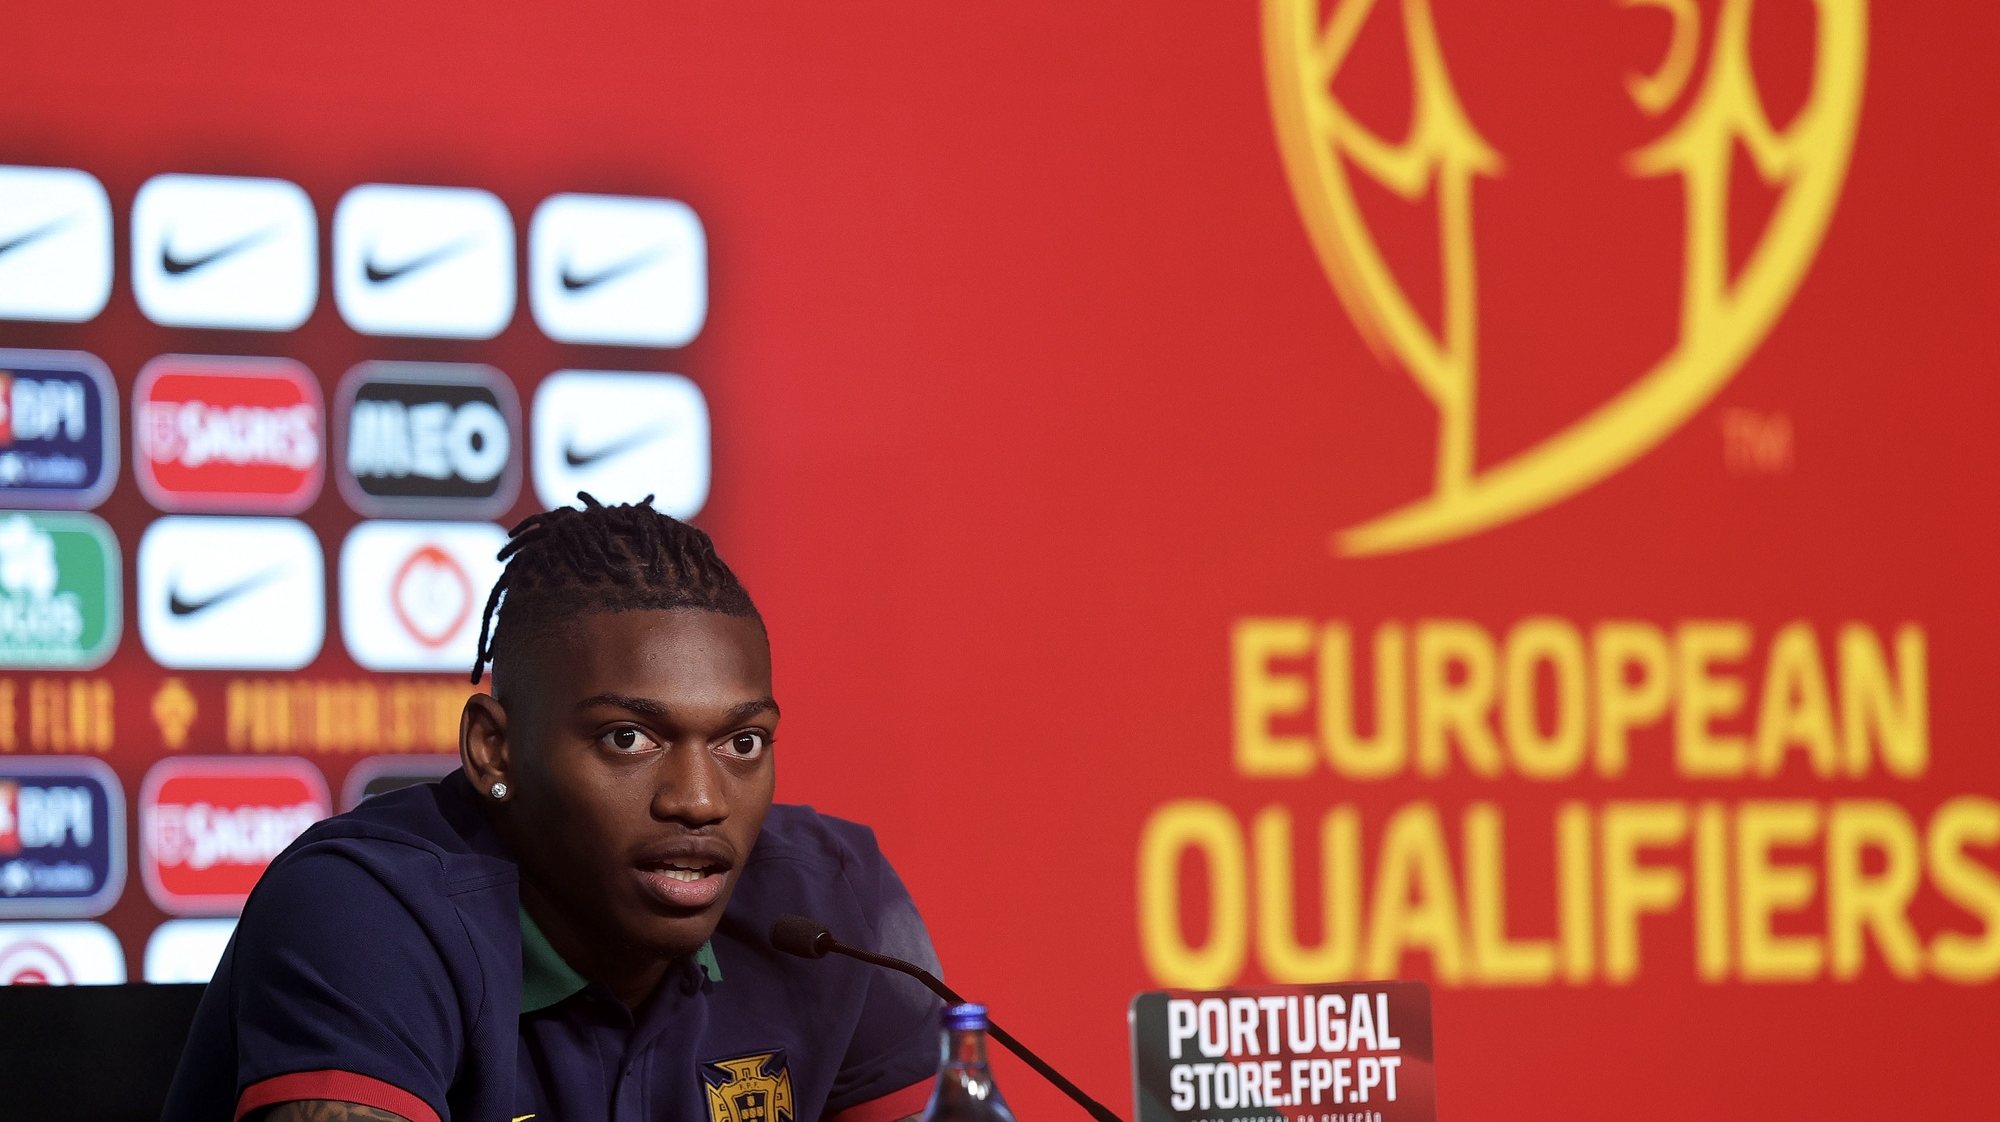 Portugal national team soccer player Rafael Leao attends a press conference during the stage of the Portuguese National Team preparation for qualifying stage for Euro 2024, in Oeiras, outskirts of Lisbon, Portugal, 13 June 2023. Portugal will face Bosnia-Herzegovina on 17 June at the Luz stadium in Lisbon. MANUEL DE ALMEIDA/LUSA